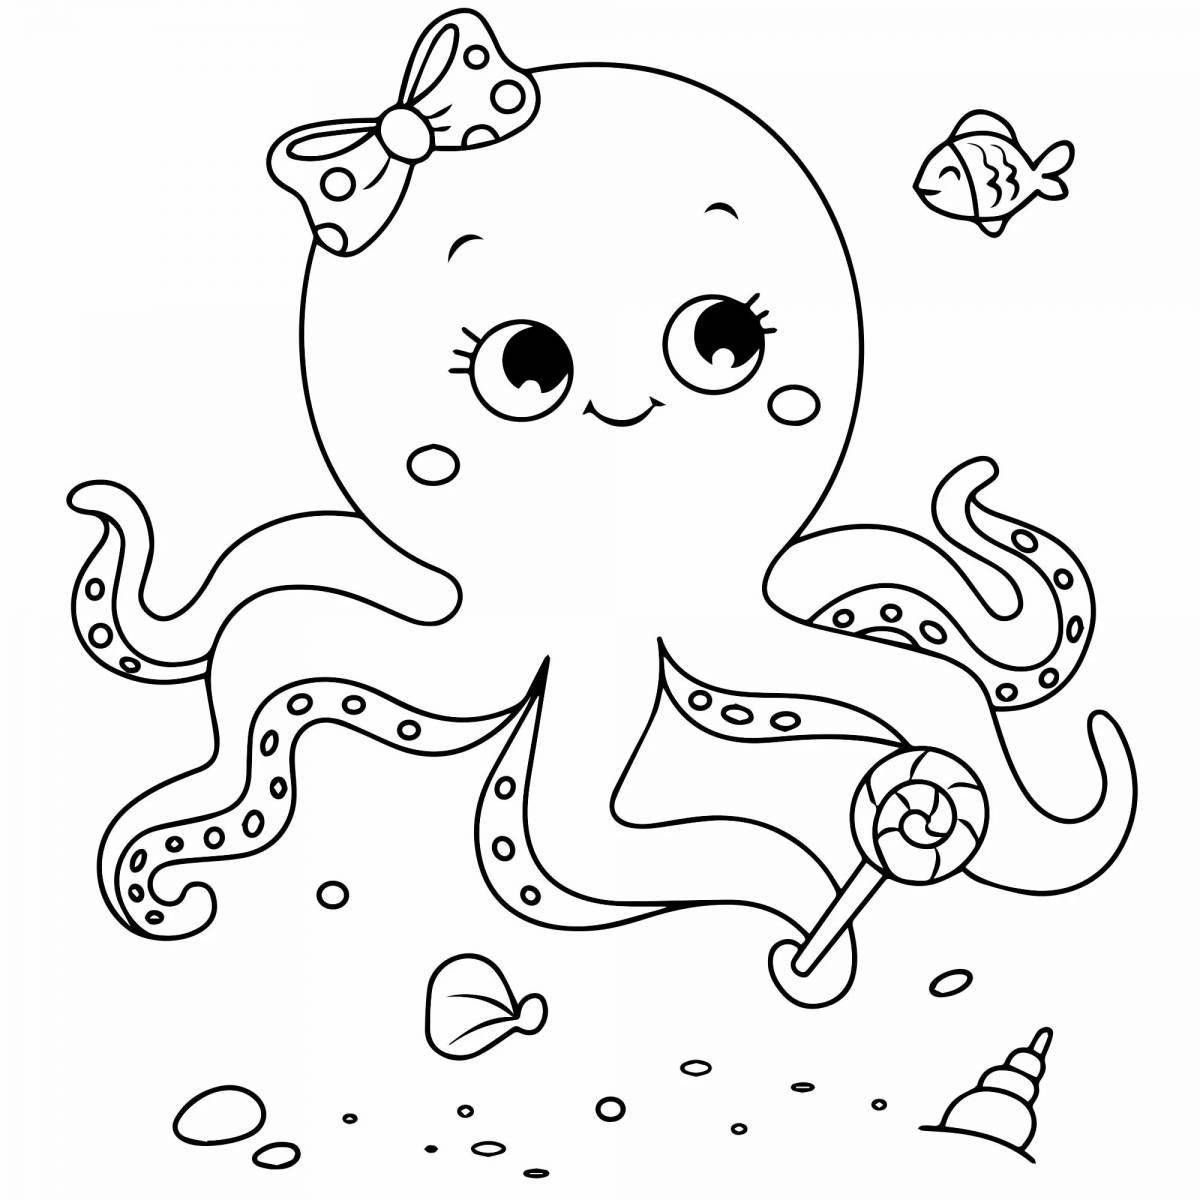 Fun coloring pages of marine life